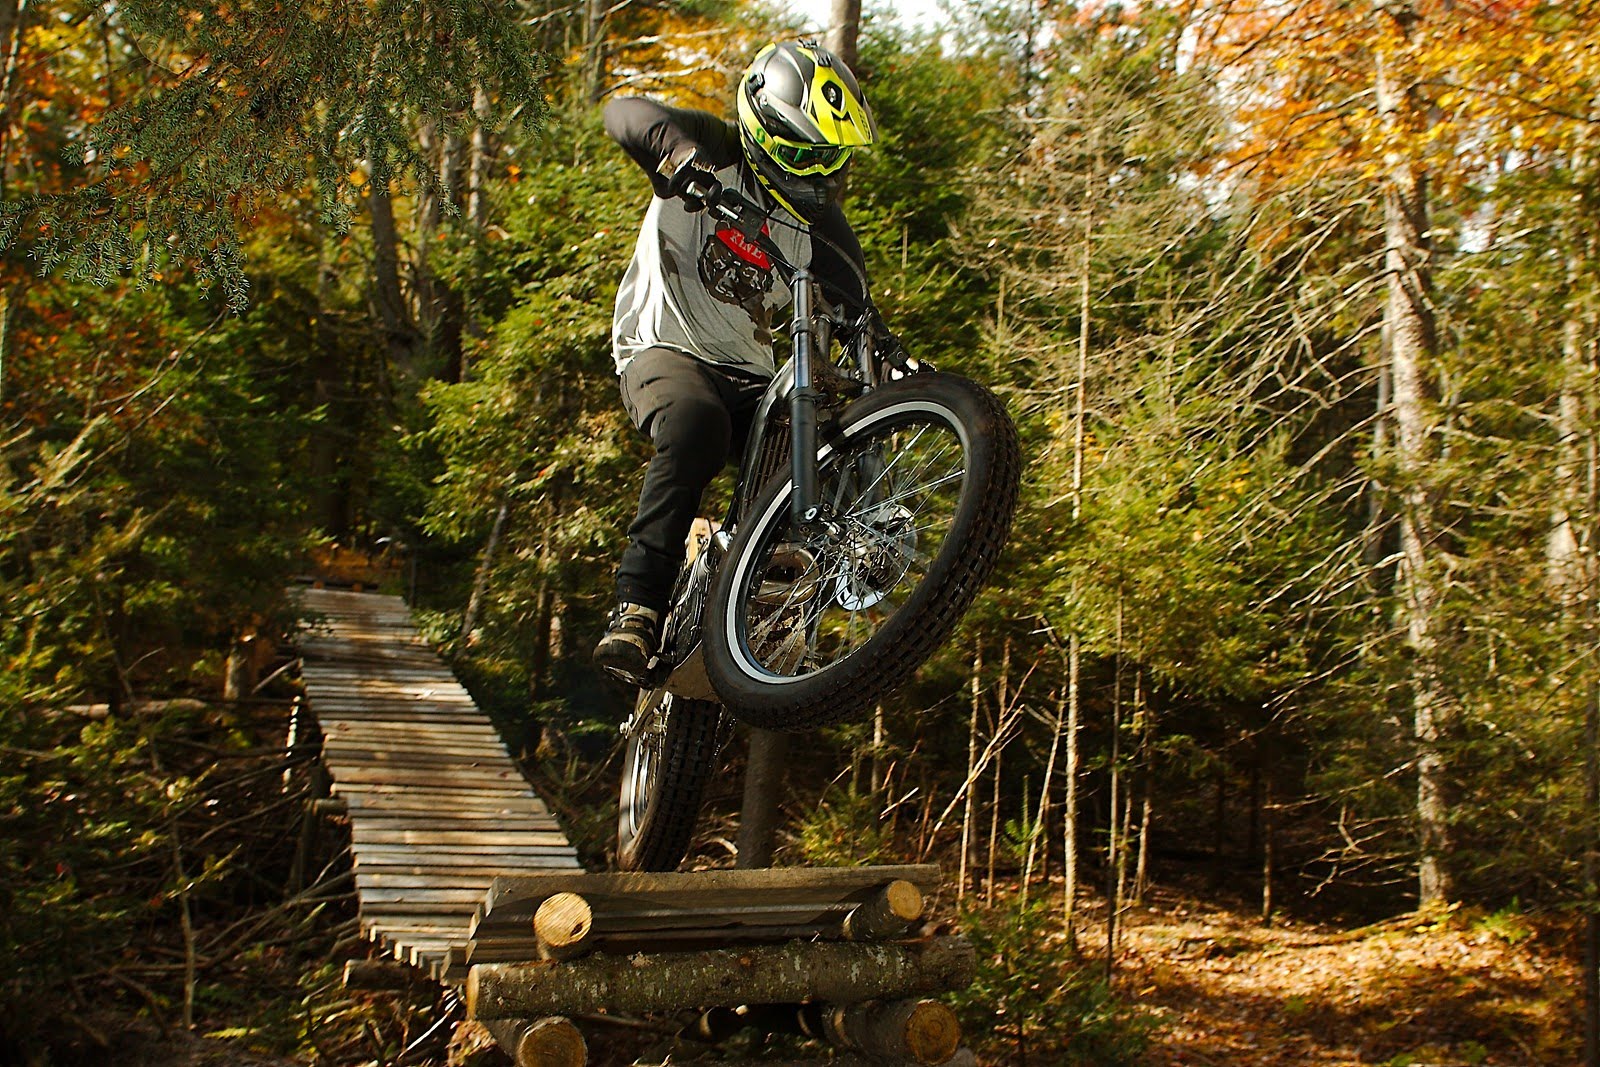 Check out what a local motorcycle freerider’s doing in the Muskoka woods | muskoka411.com